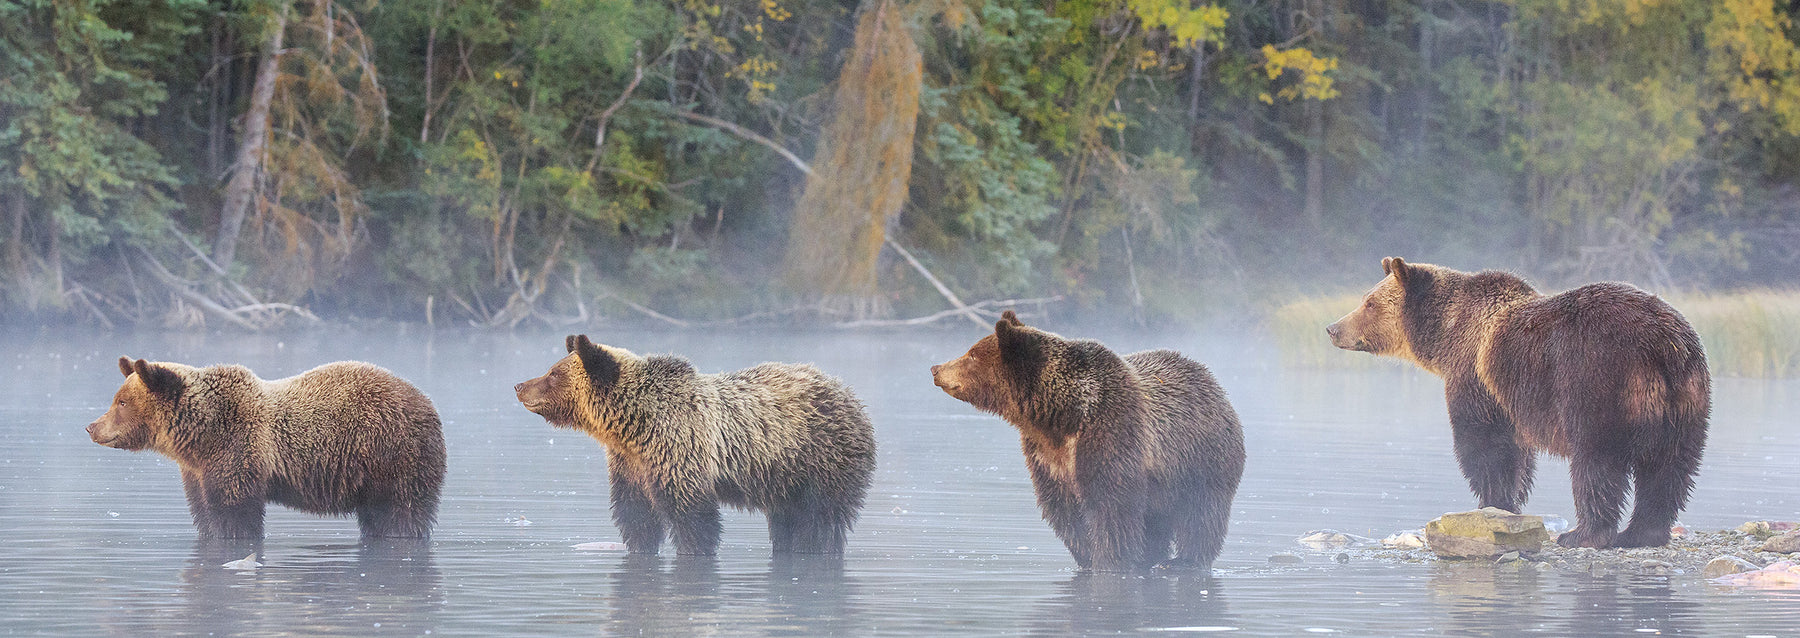 Grizzly bear photography - British Columbia